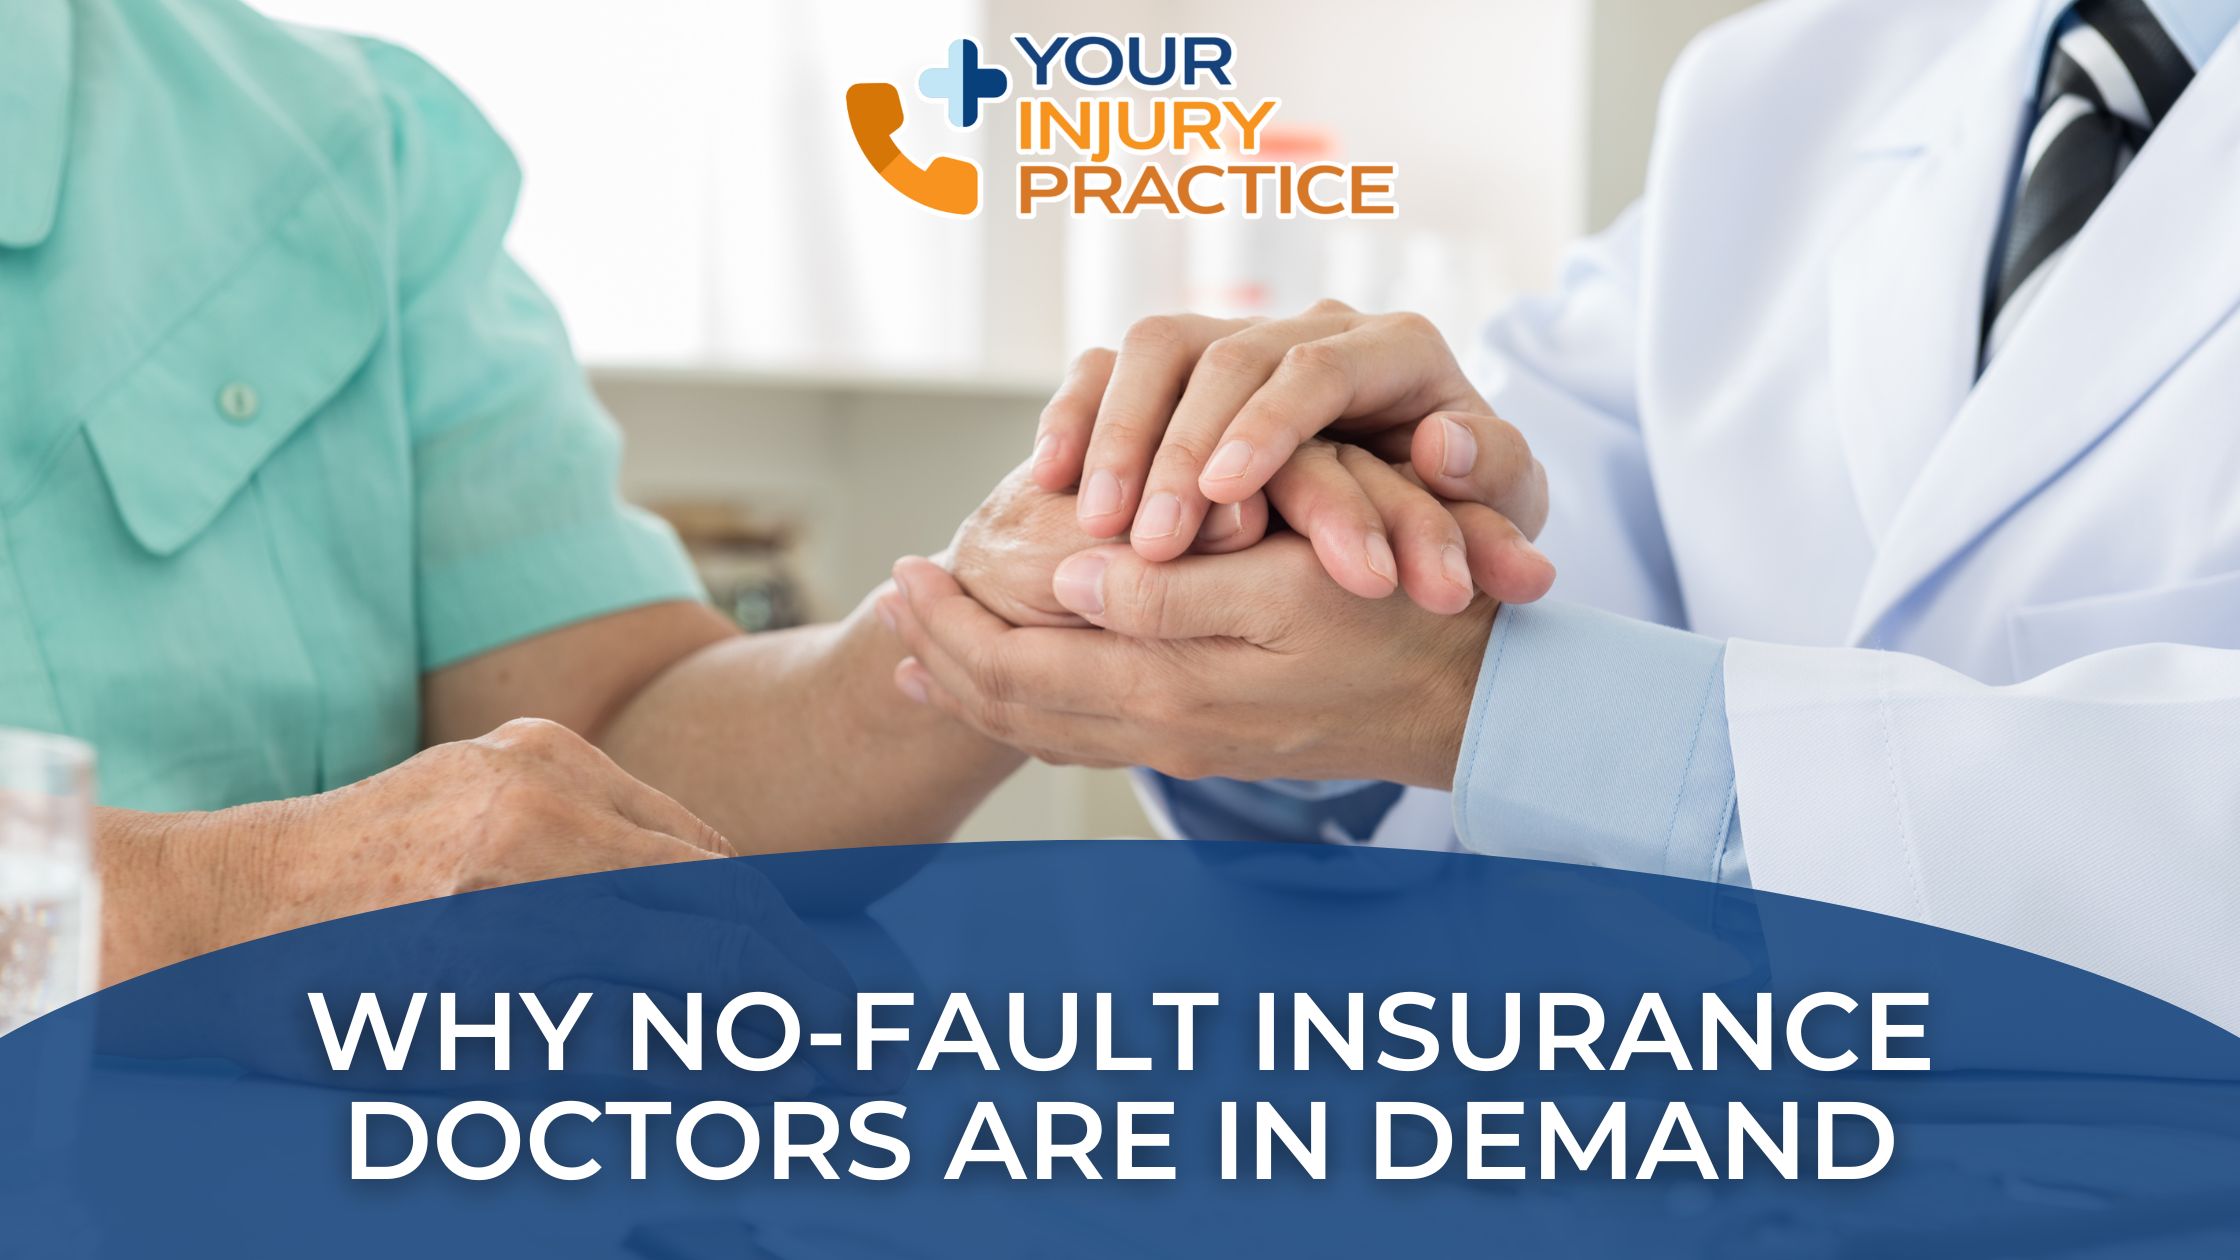 Why no fault insurance doctors are in demand for injury cases.